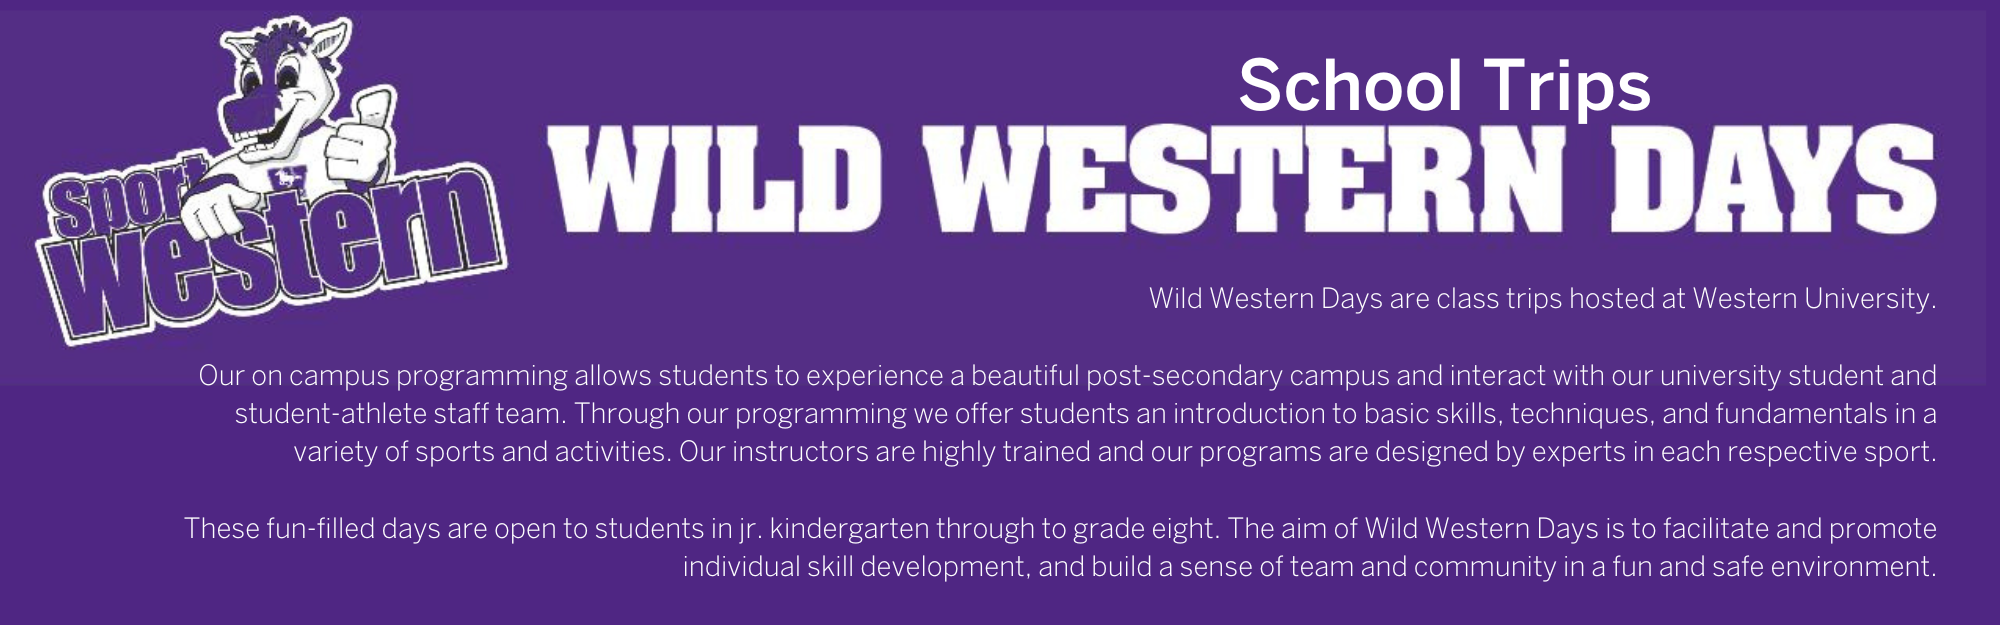 Wild Western Days School Trips: Wild Western Days are class trips hosted at Western University.  Our on campus programming allows students to experience a beautiful post-secondary campus and interact with our university student and student-athlete staff team. Through our programming we offer students an introduction to basic skills, techniques, and fundamentals in a variety of sports and activities. Our instructors are highly trained and our programs are designed by experts in each respective sport.  These fun-filled days are open to students in jr. kindergarten through to grade eight. The aim of Wild Western Days is to facilitate and promote individual skill development, and build a sense of team and community in a fun and safe environment